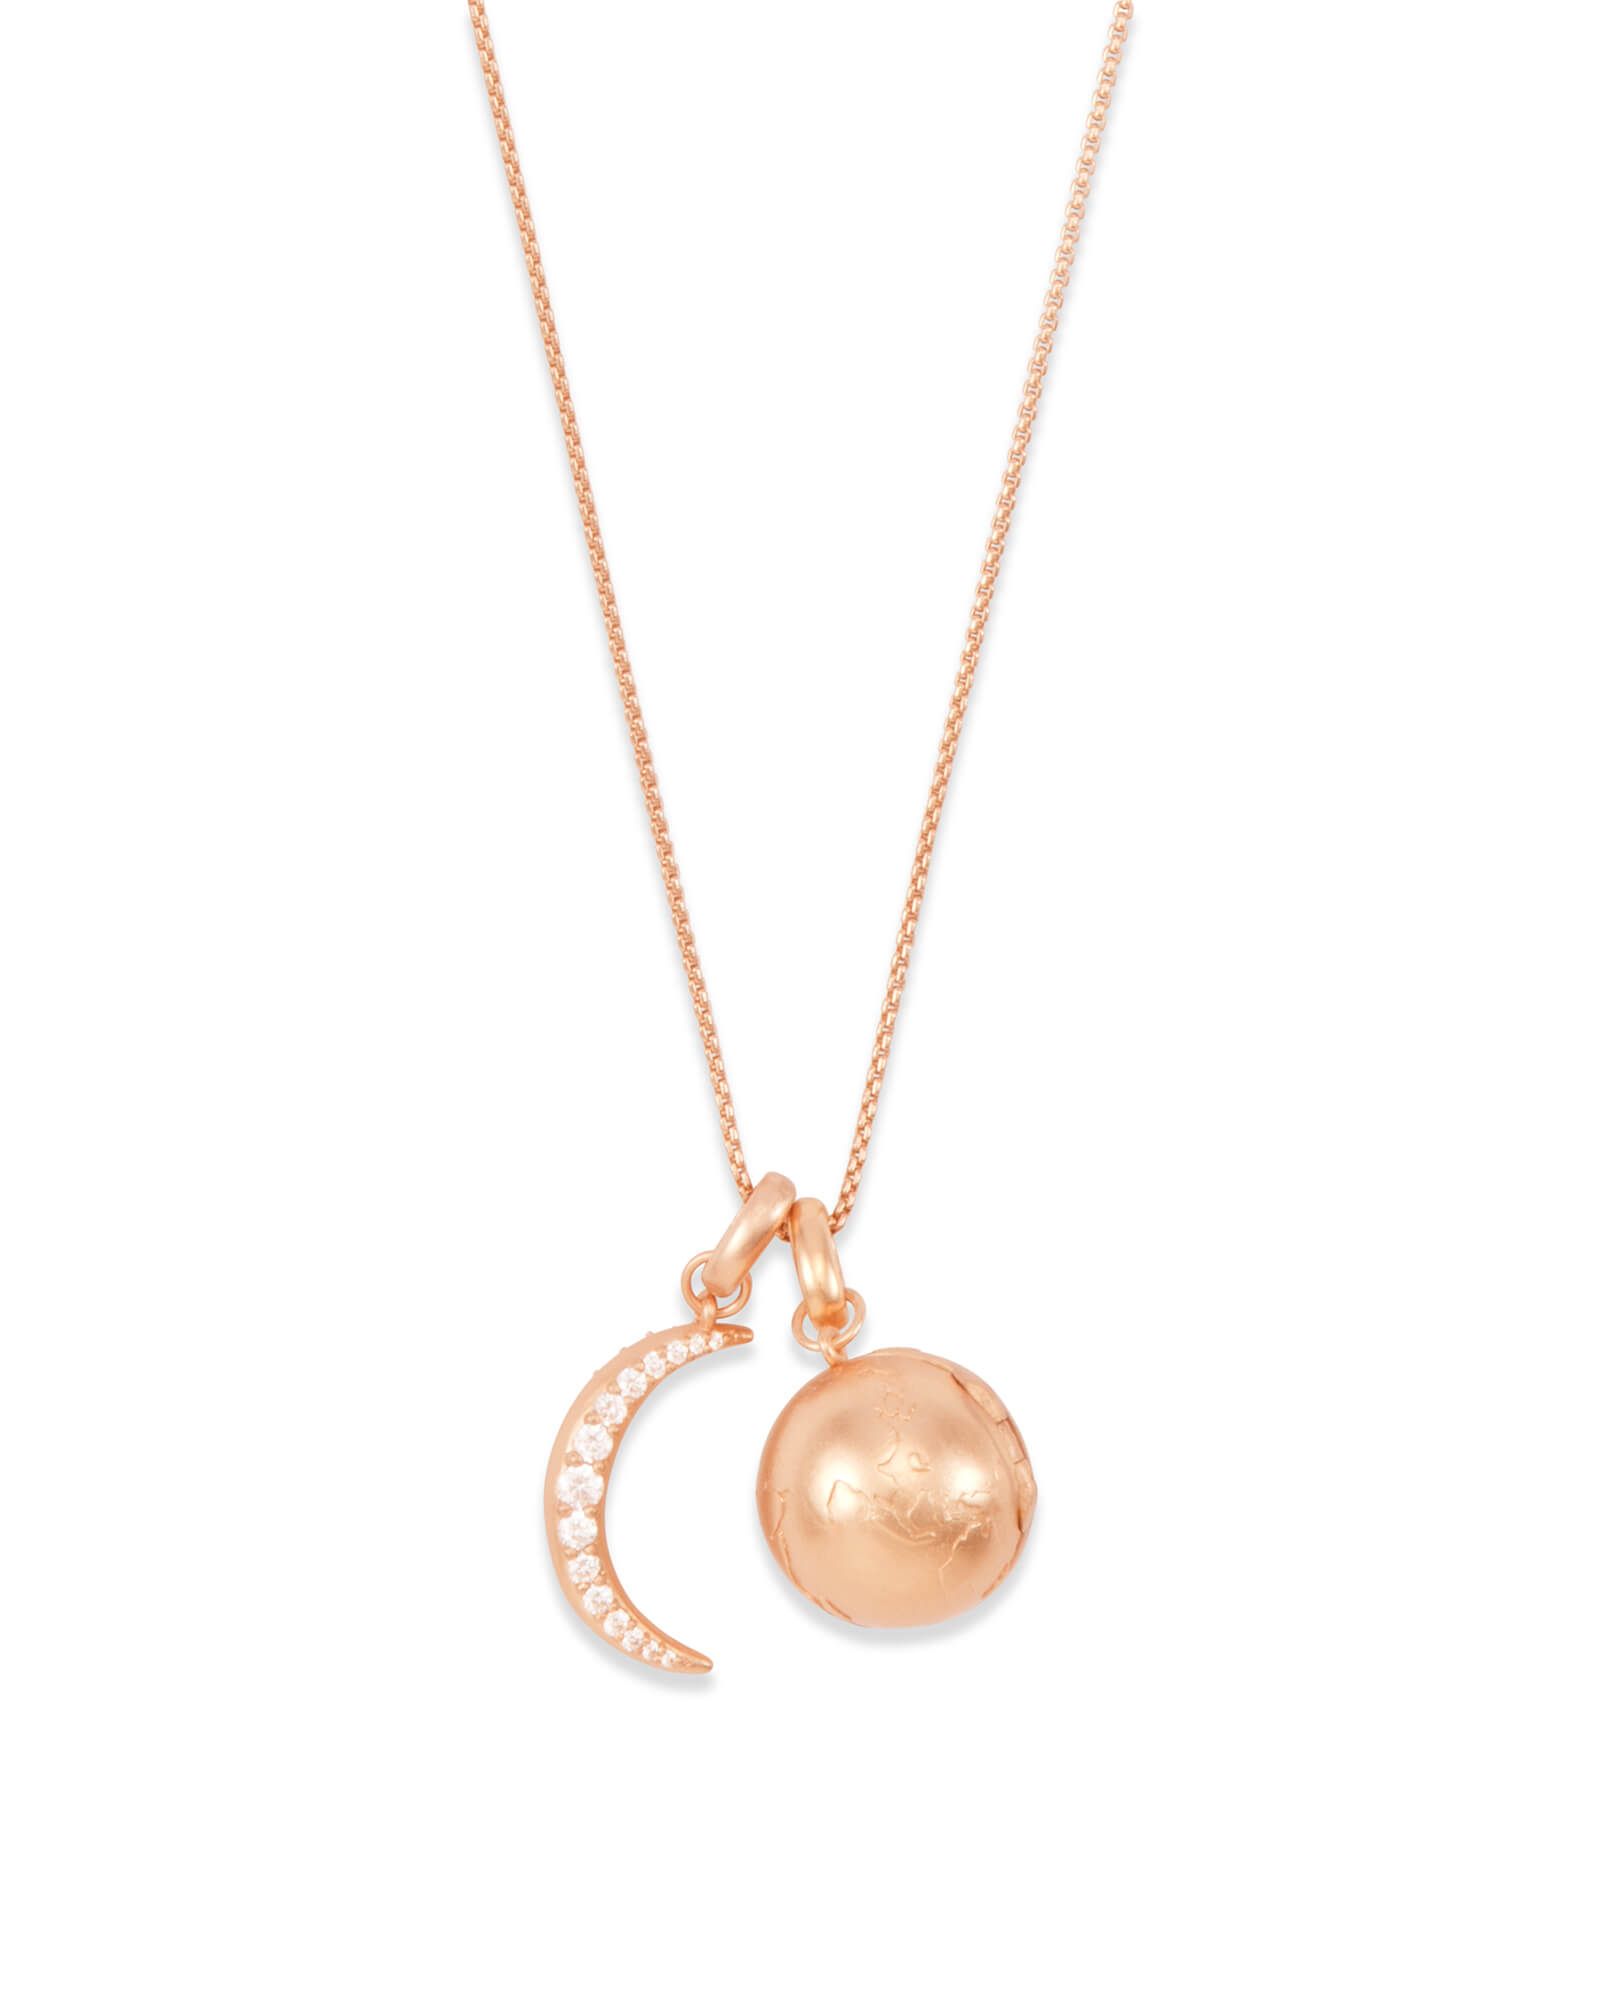 To the Moon and Back Charm Necklace Set in Rose Gold | Kendra Scott